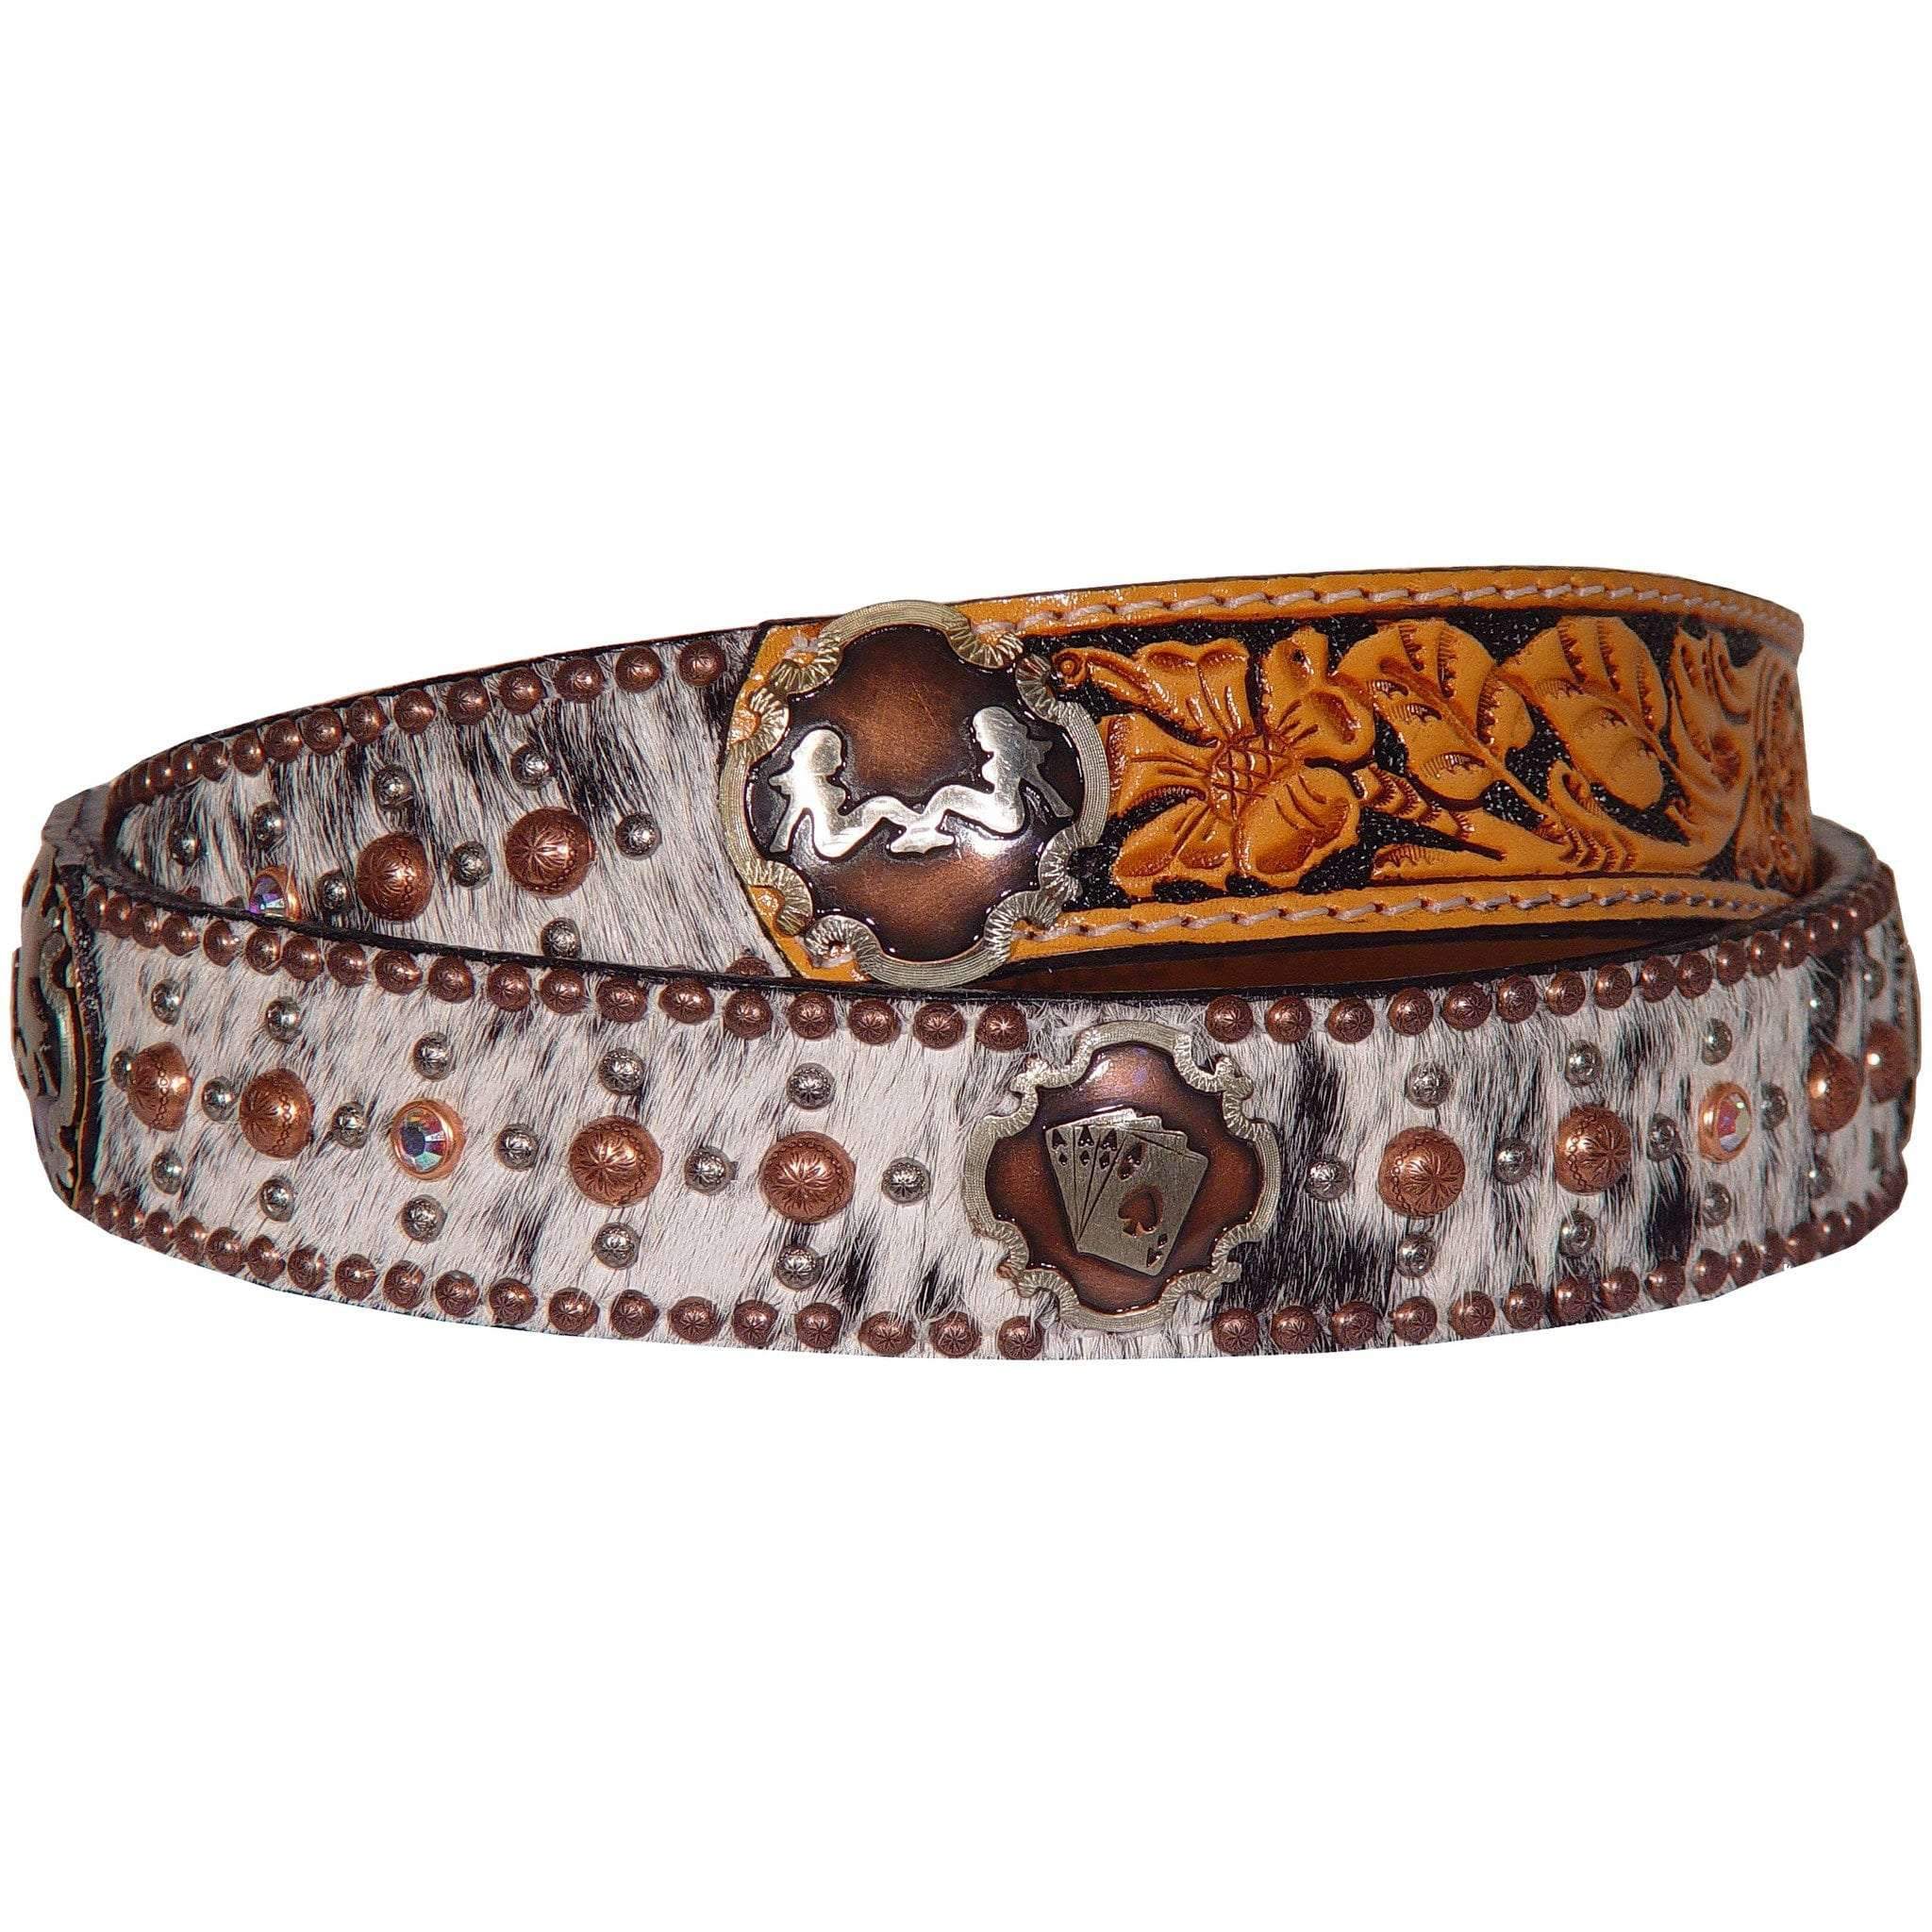 B154 - Roan Hair and Floral Tooled Belt - Double J Saddlery